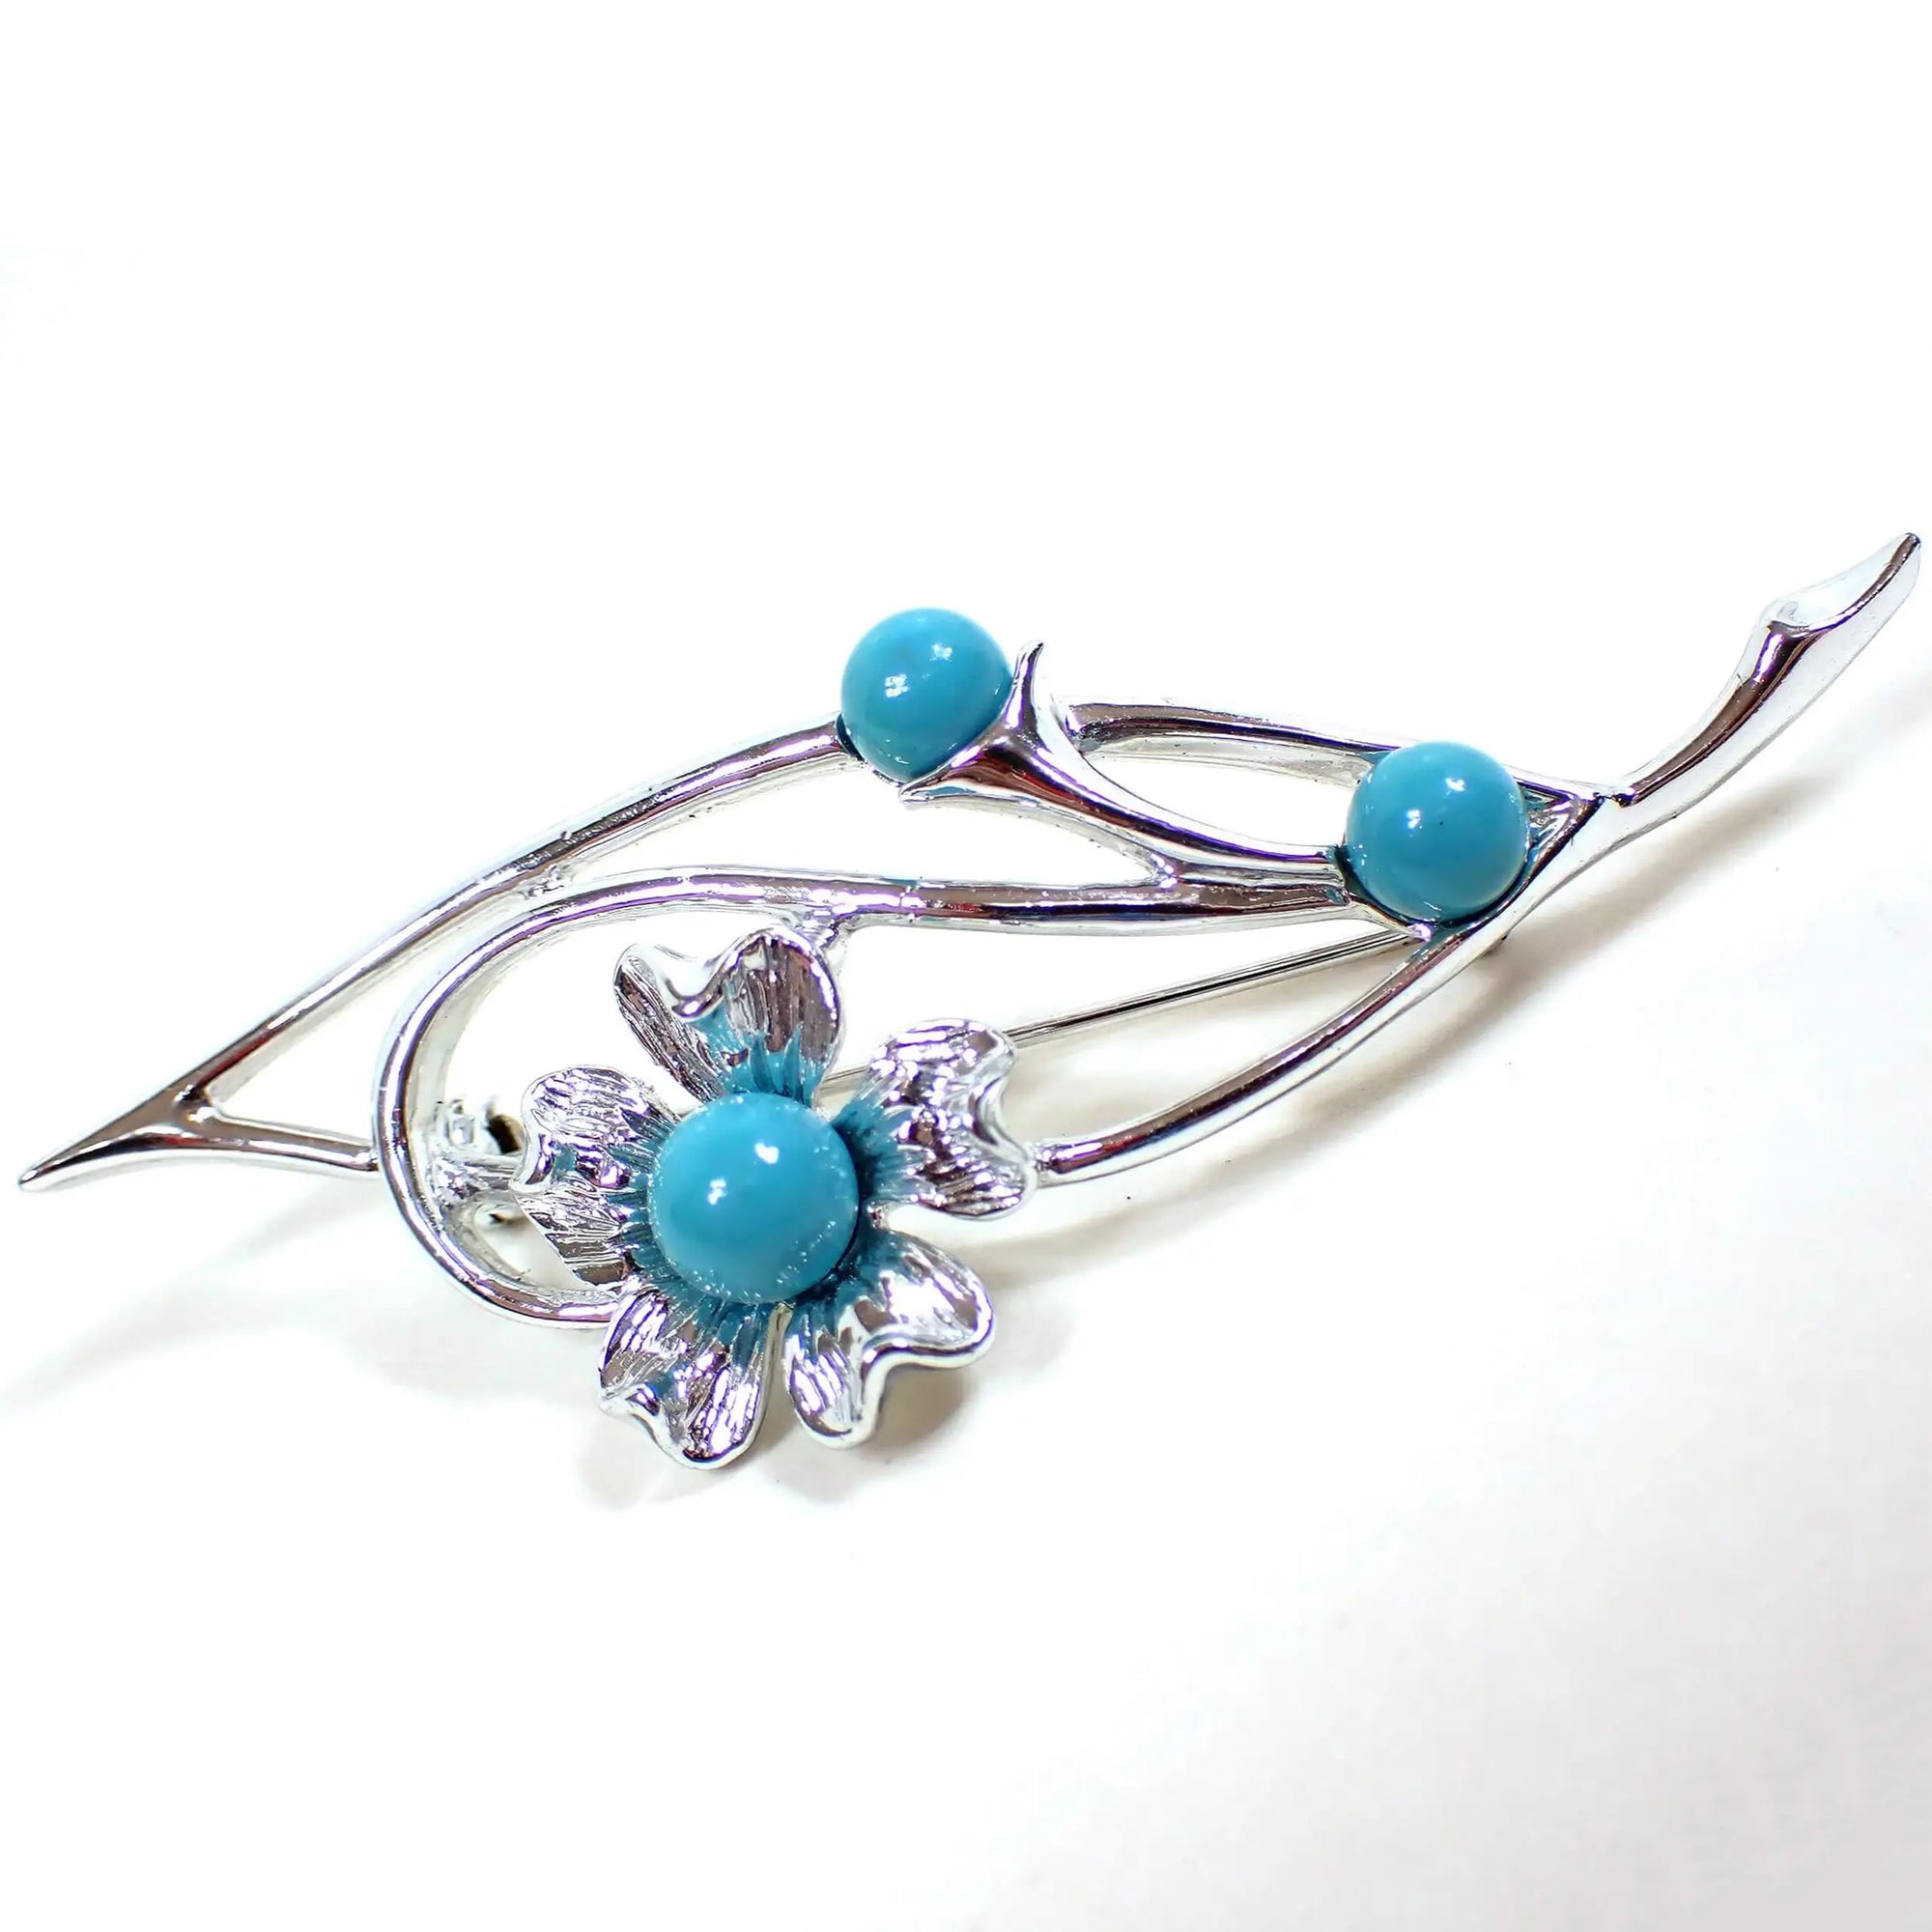 Angled front view of the Mid Century vintage Sarah Coventry floral brooch pin. The metal is silver tone in color. There is an angled open leaf like shape with a curled area and a flower at the end. There are three turquoise blue color cabs on the brooch, including one in the middle of the flower.